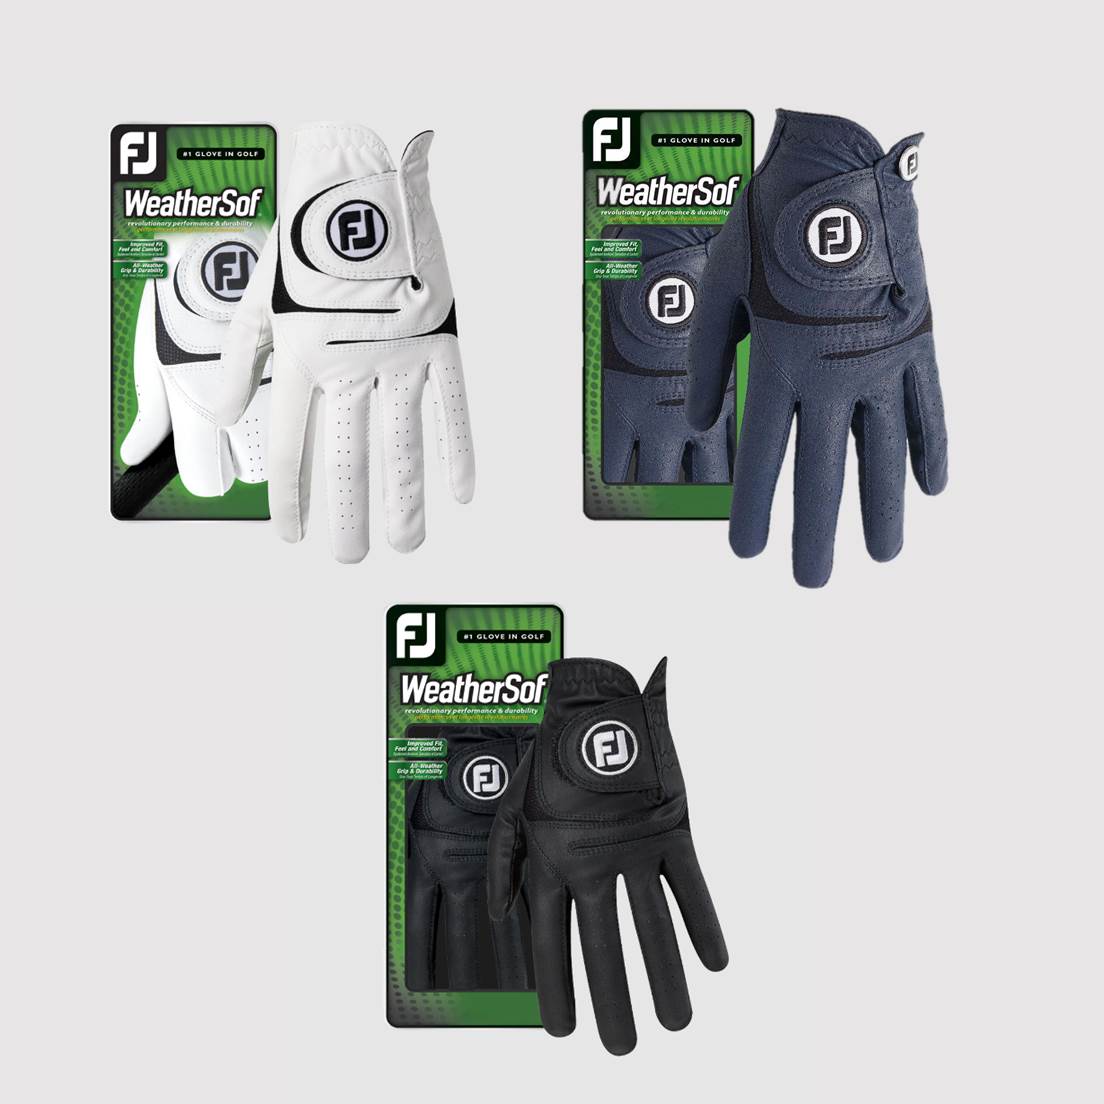 FOOTJOY WEATHERSOF GLOVE VALUE PACK (2pc)